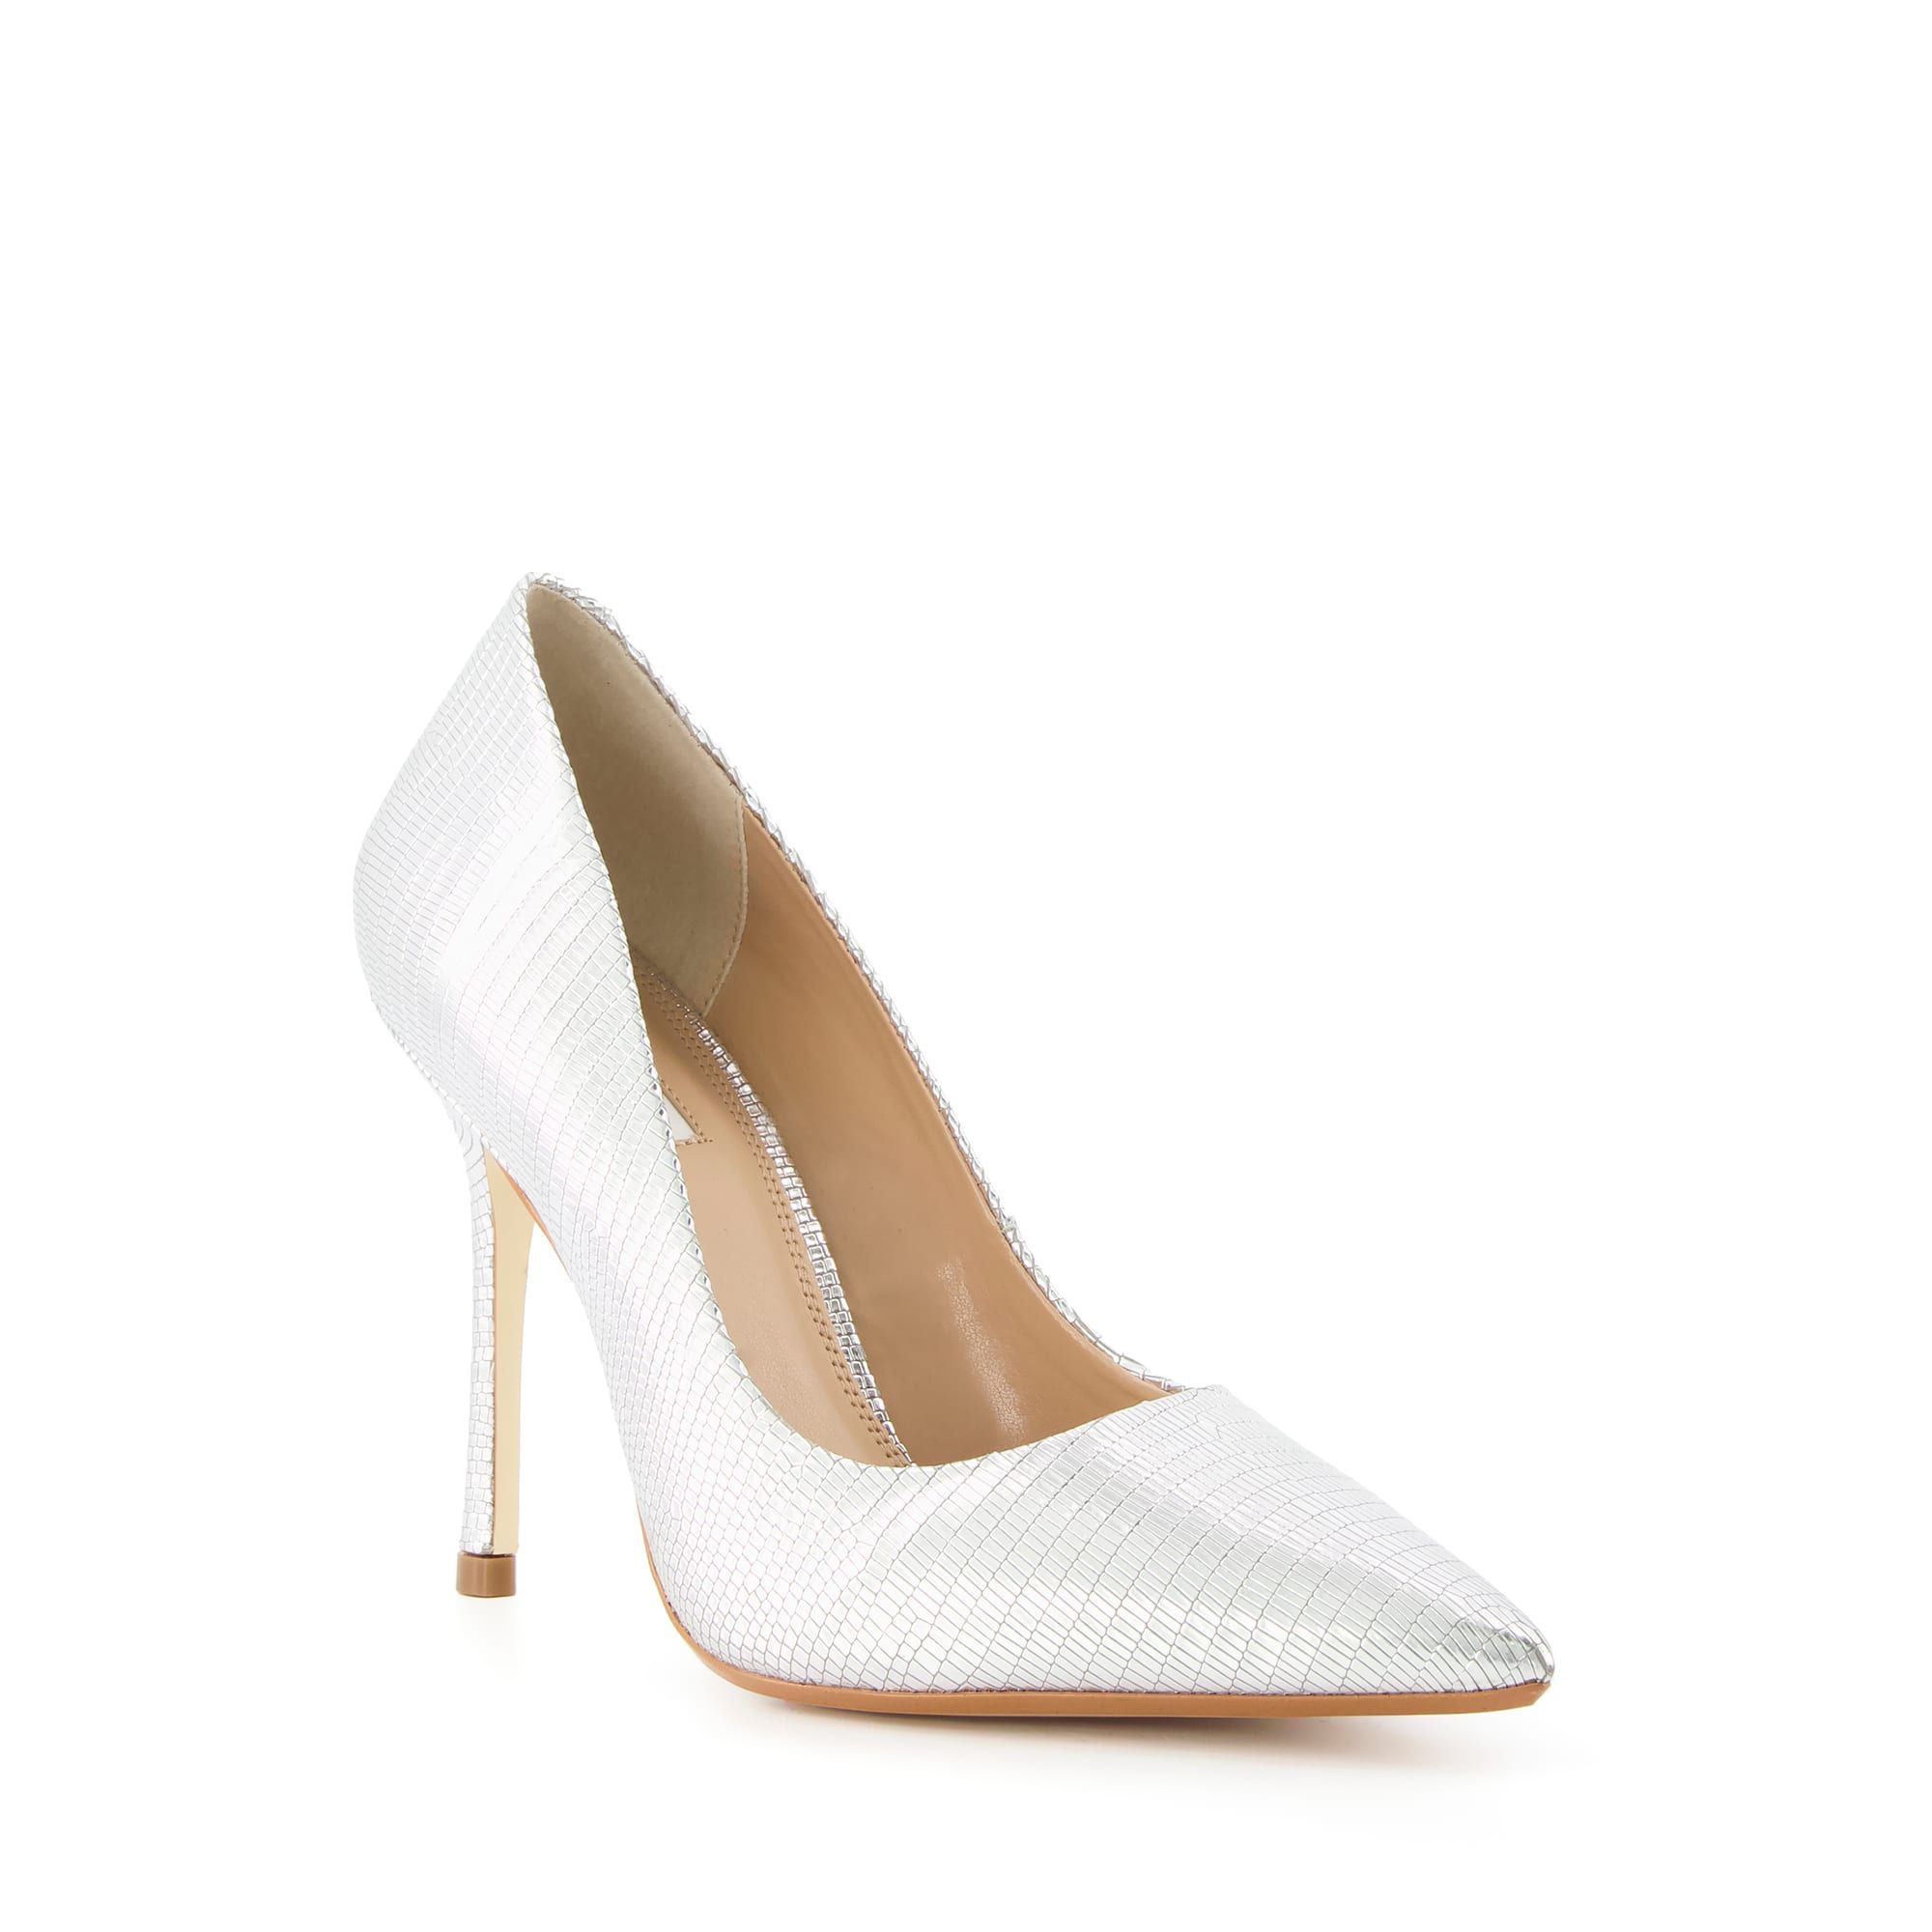 Office or going out, these heels are the perfect styles to elevate your outfit. Working on a classic court style with a sophisticated pointed to, they rest on a slim stiletto heel for an effortlessly chic finish.